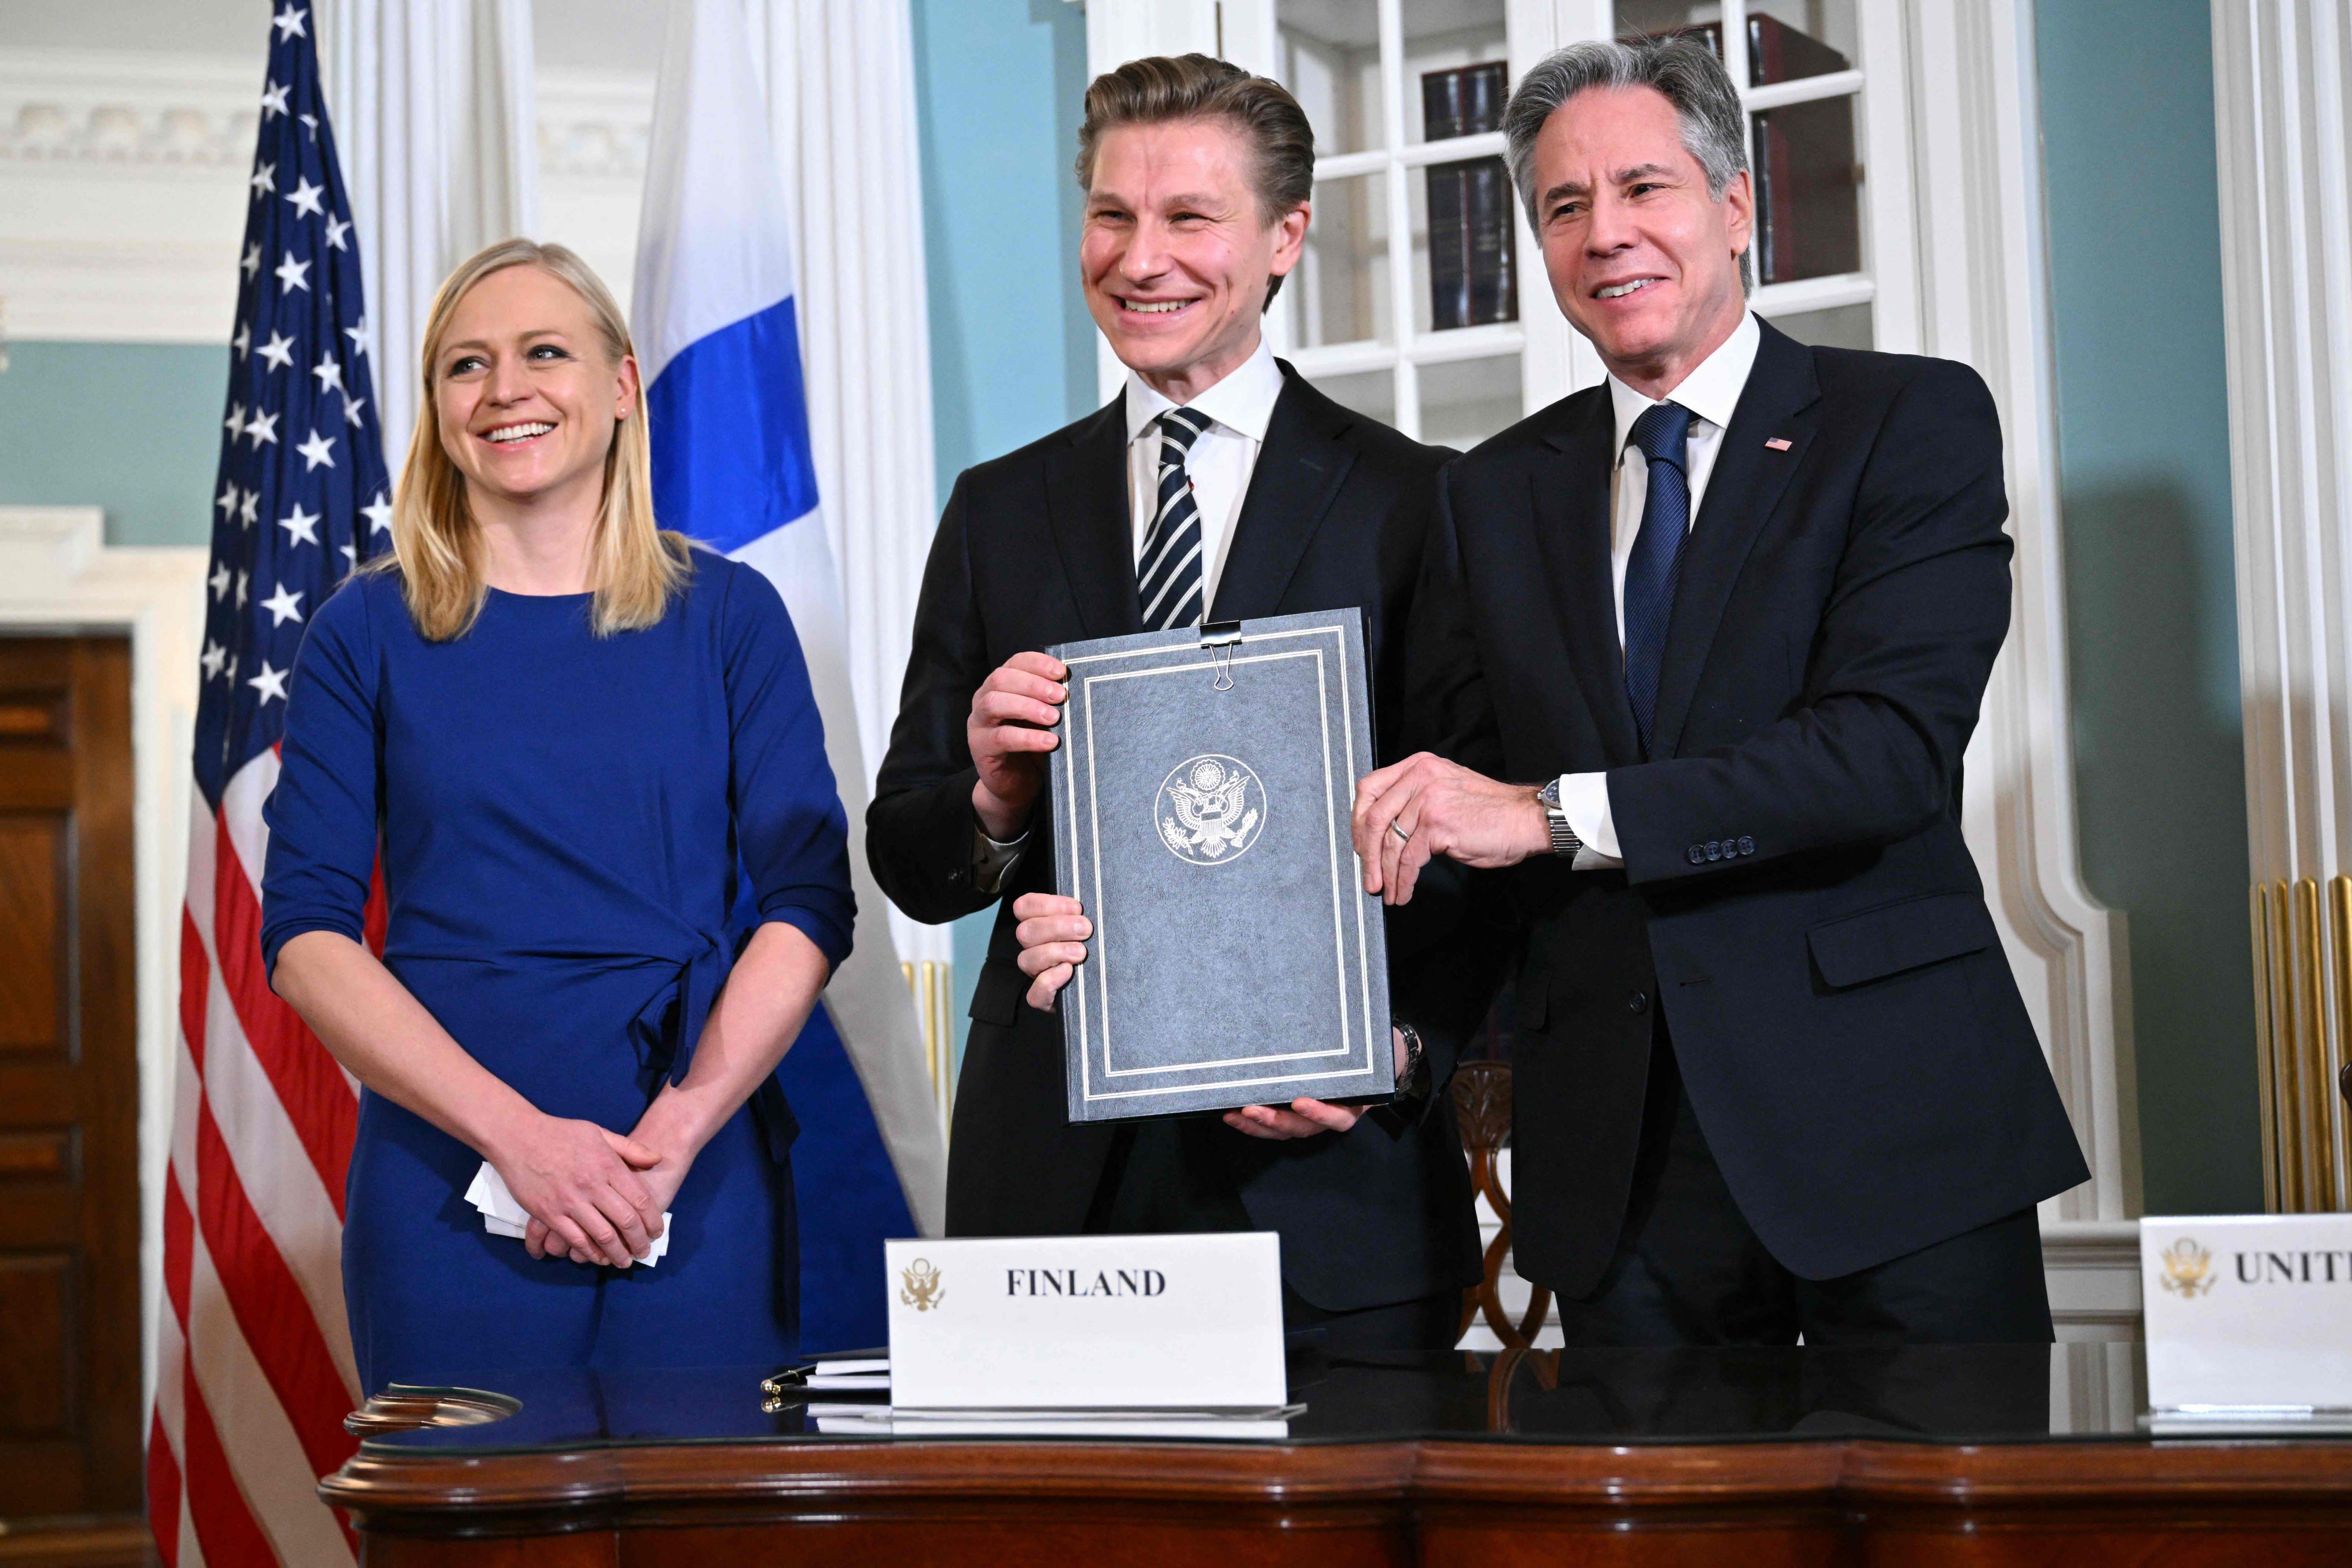 See: Finland and the United States sign a major defense contract